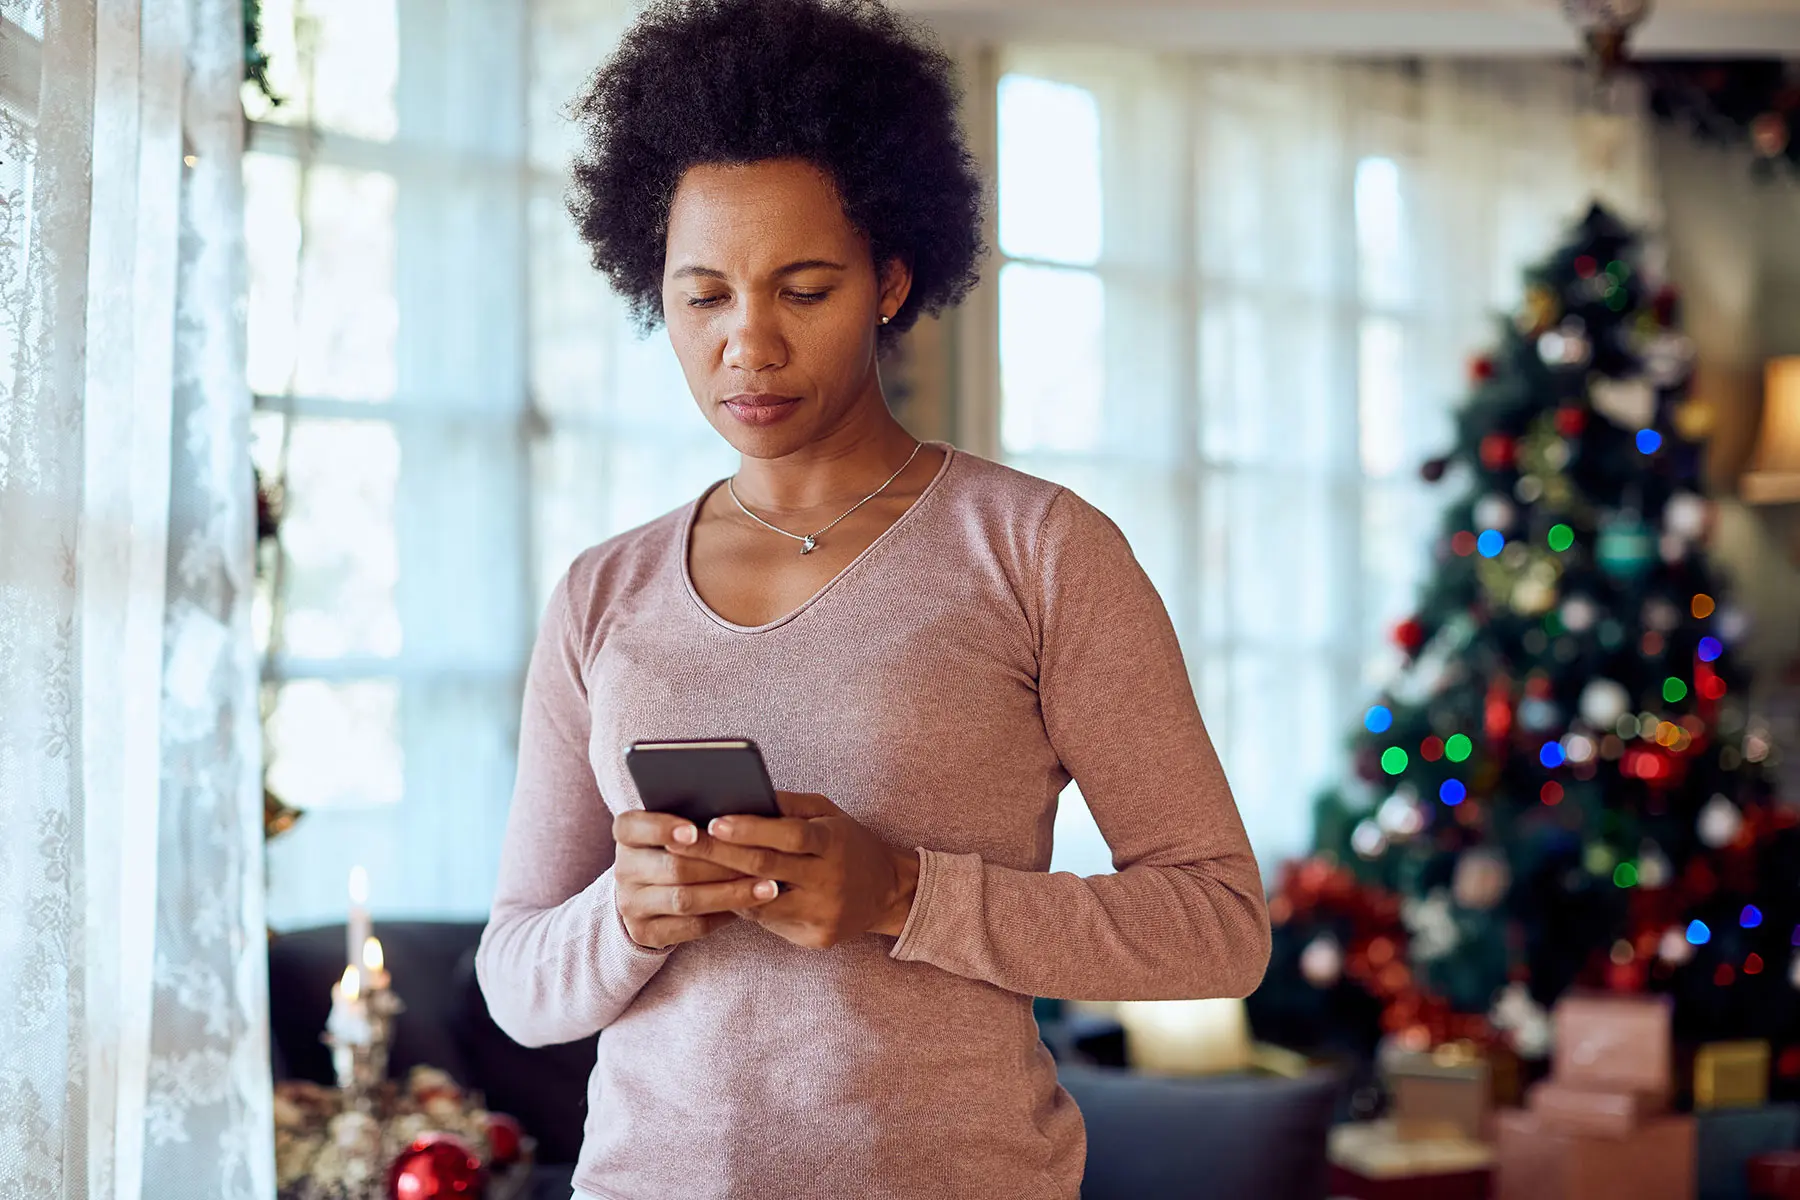 Black woman, serious, looking at phone with christmas tree in background. AW535